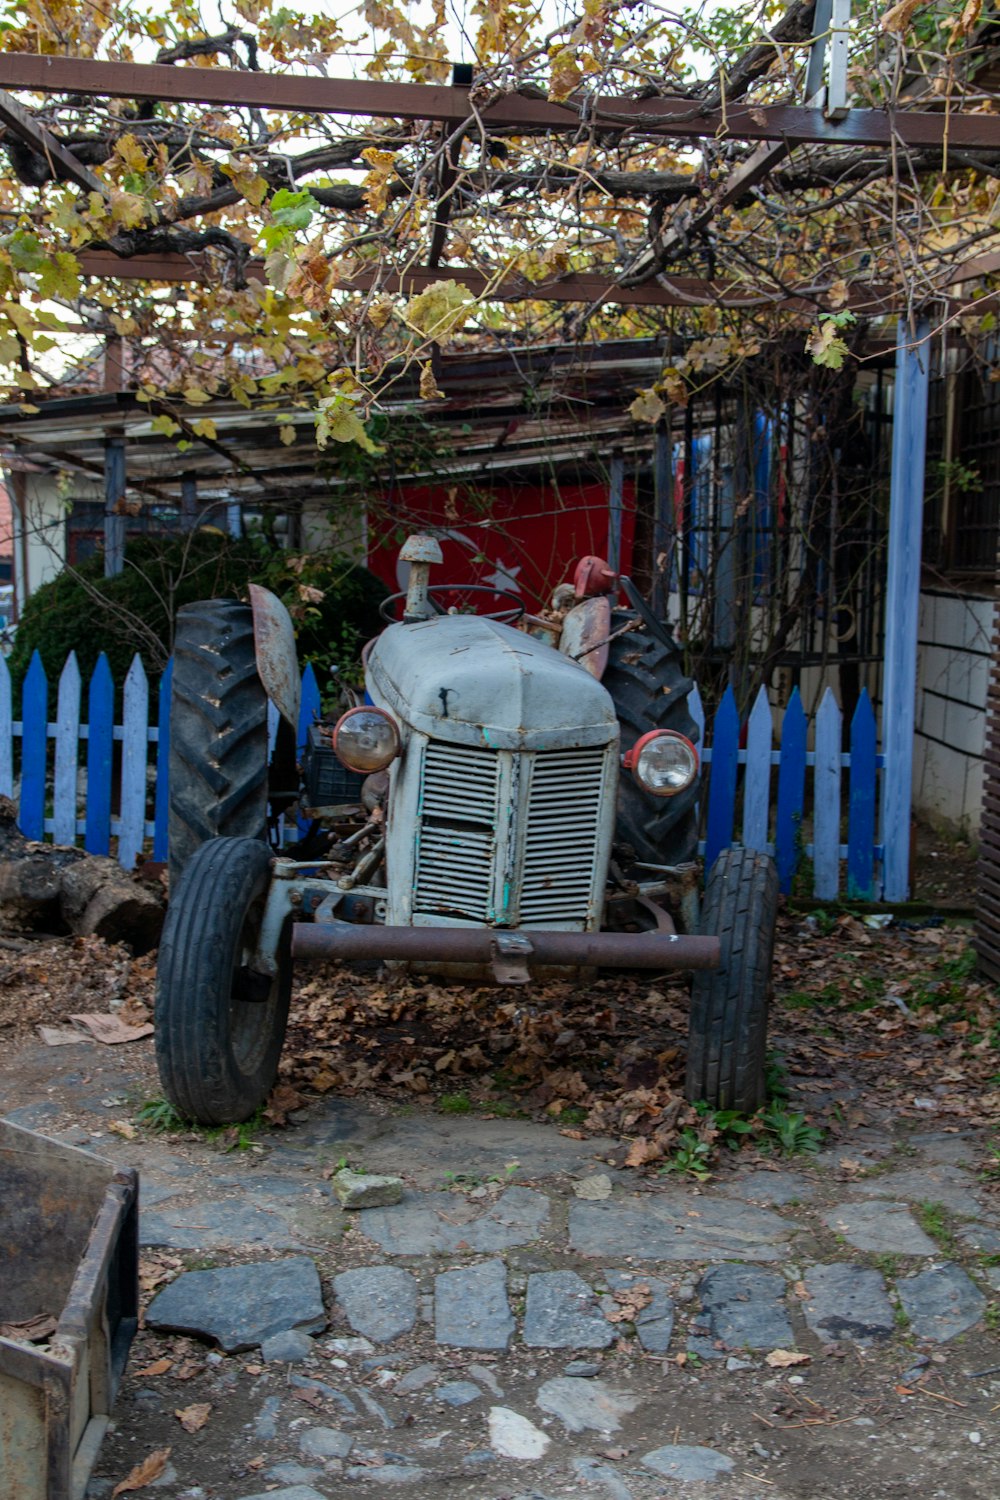 an old tractor is parked in front of a house